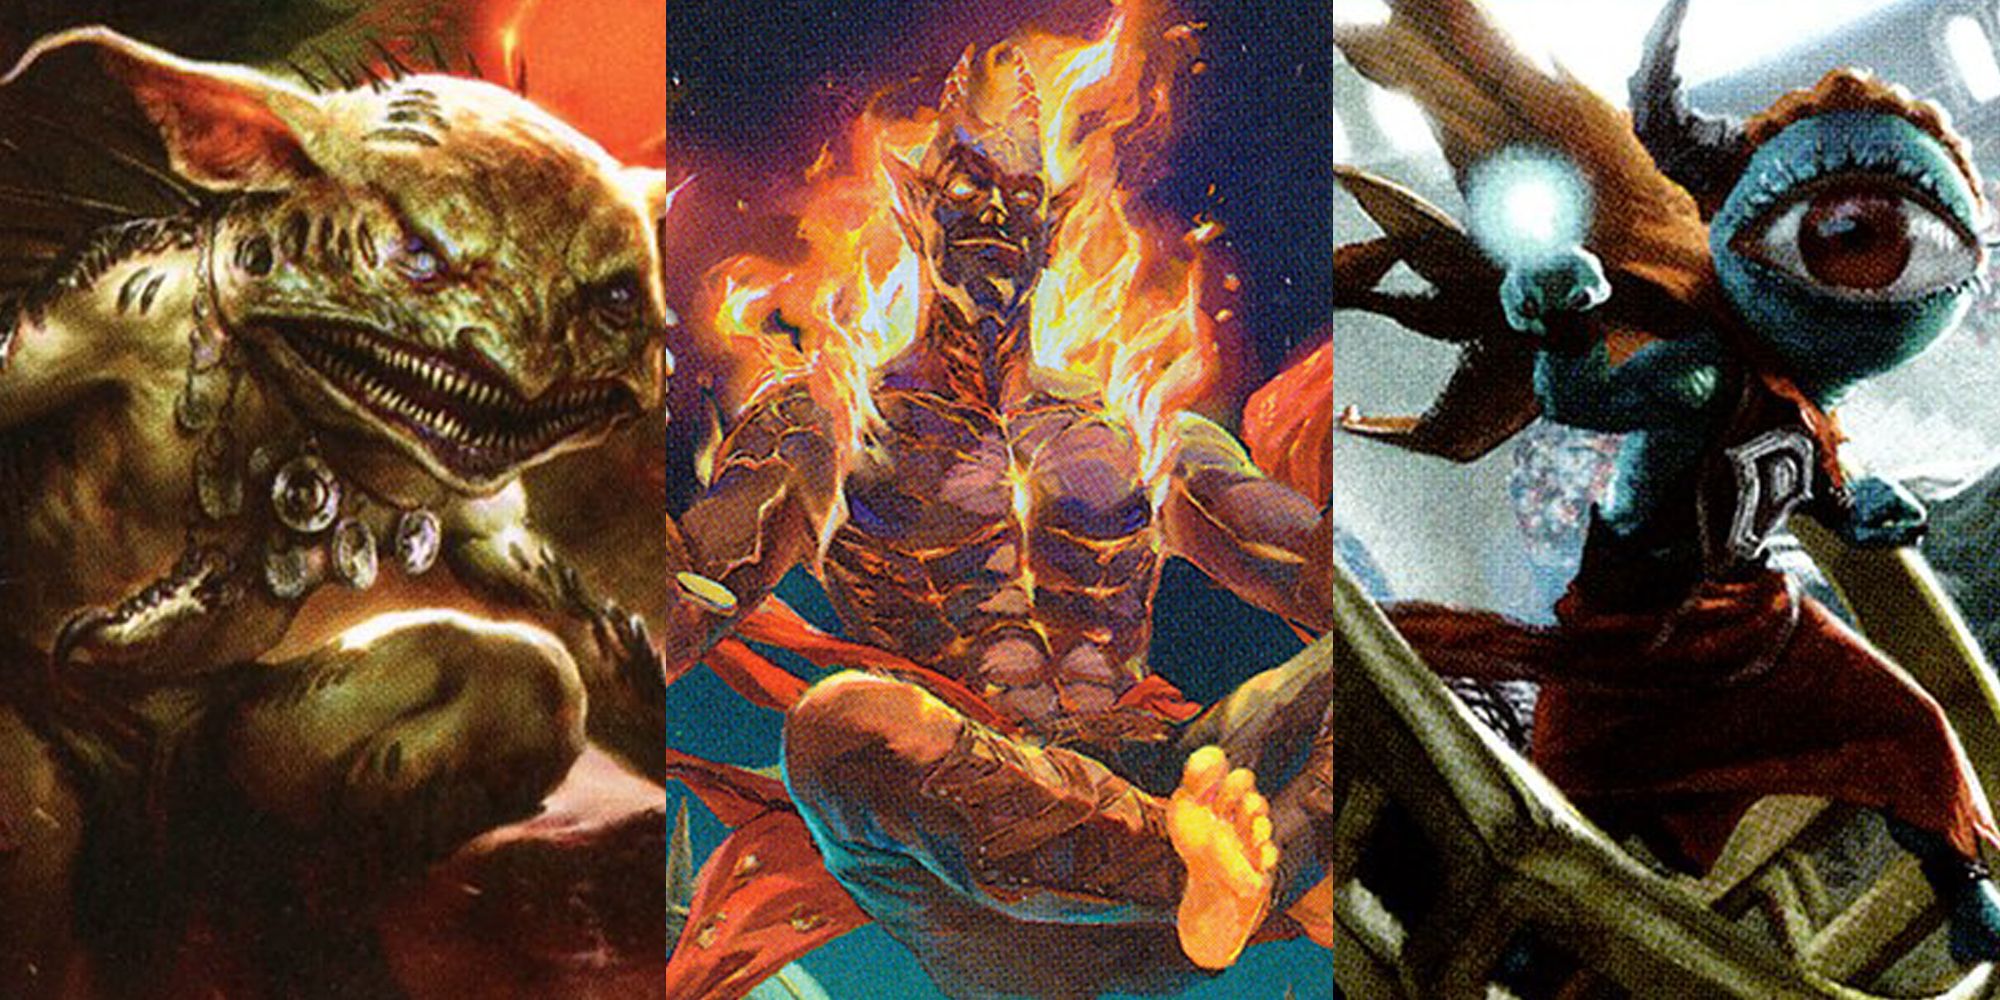 Magic: The Gathering image showing Zndrsplt, Eye of Wisdom; Krark the Thumbless; and Yusri, Fortune's Flame